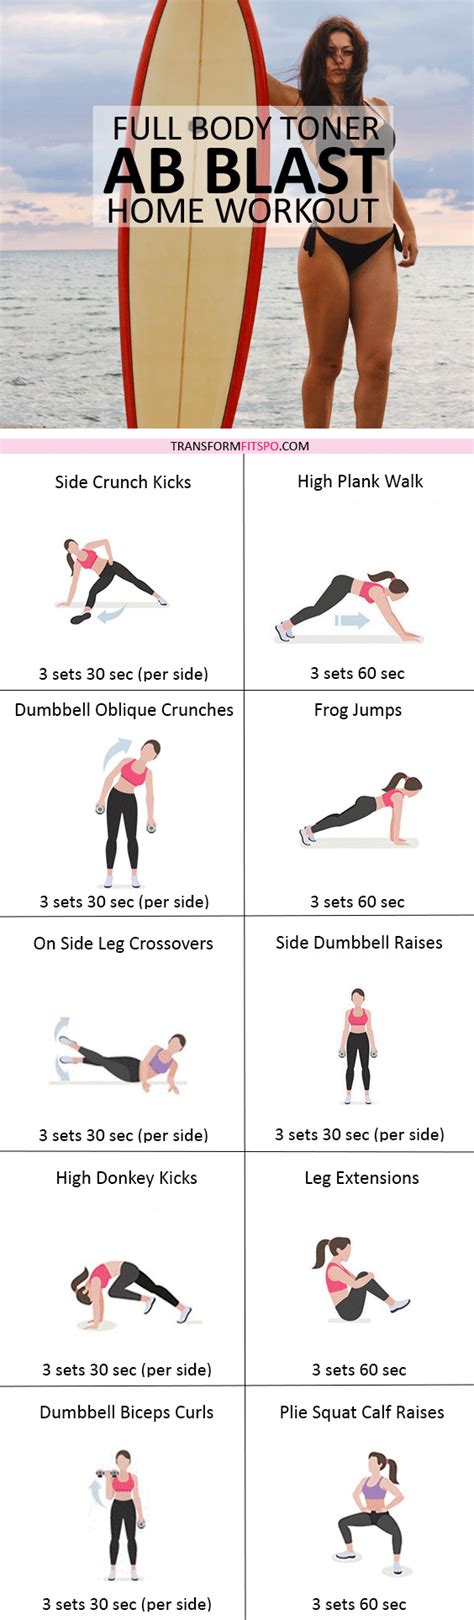 Womensworkout Workout Femalefitness Share And Repin If This Workout Helped You Tone Your